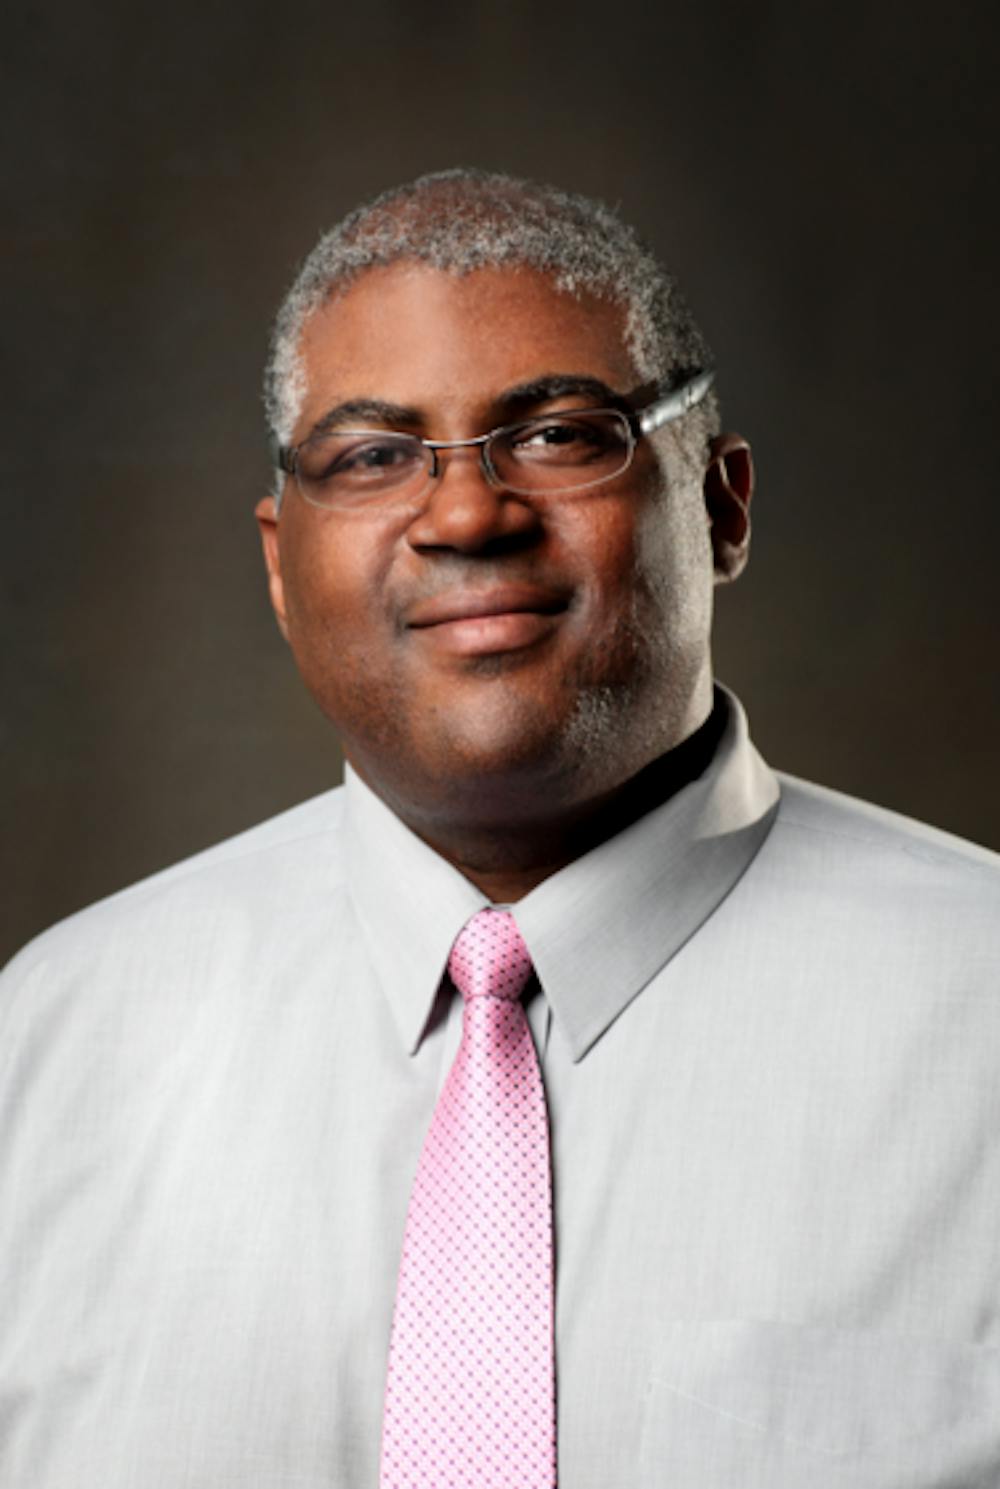 Keith Howard, who is currently serving as the Interim Dean for CLA